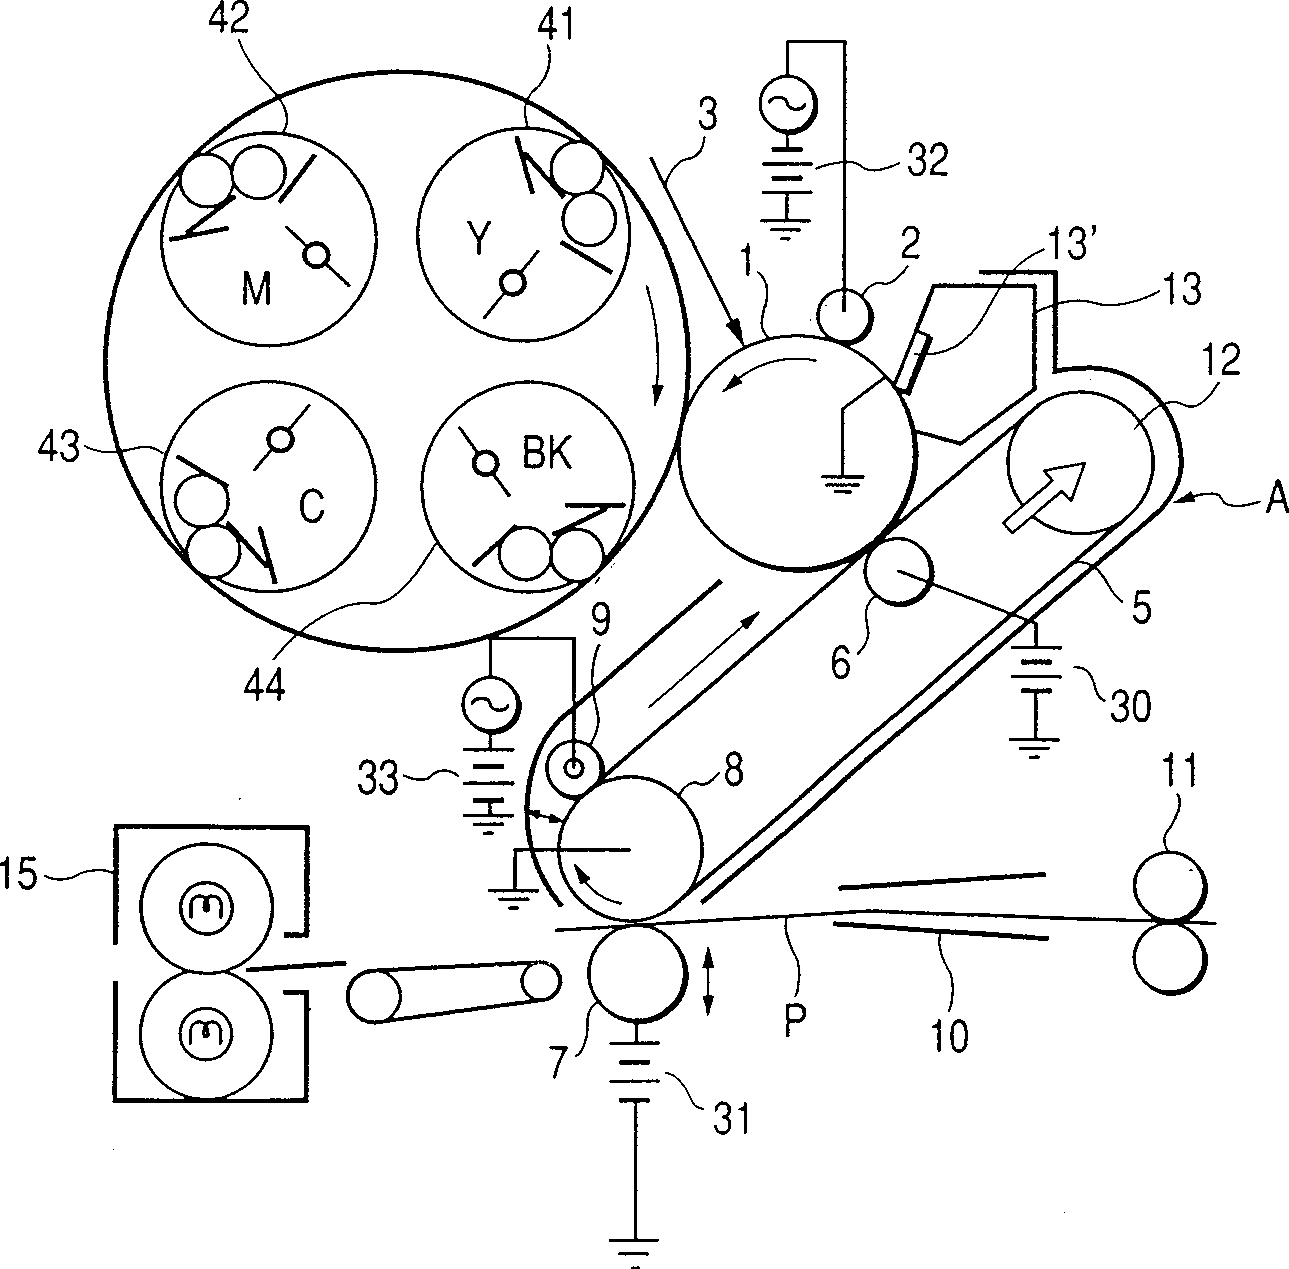 Processing box image device and inter-transferring belt